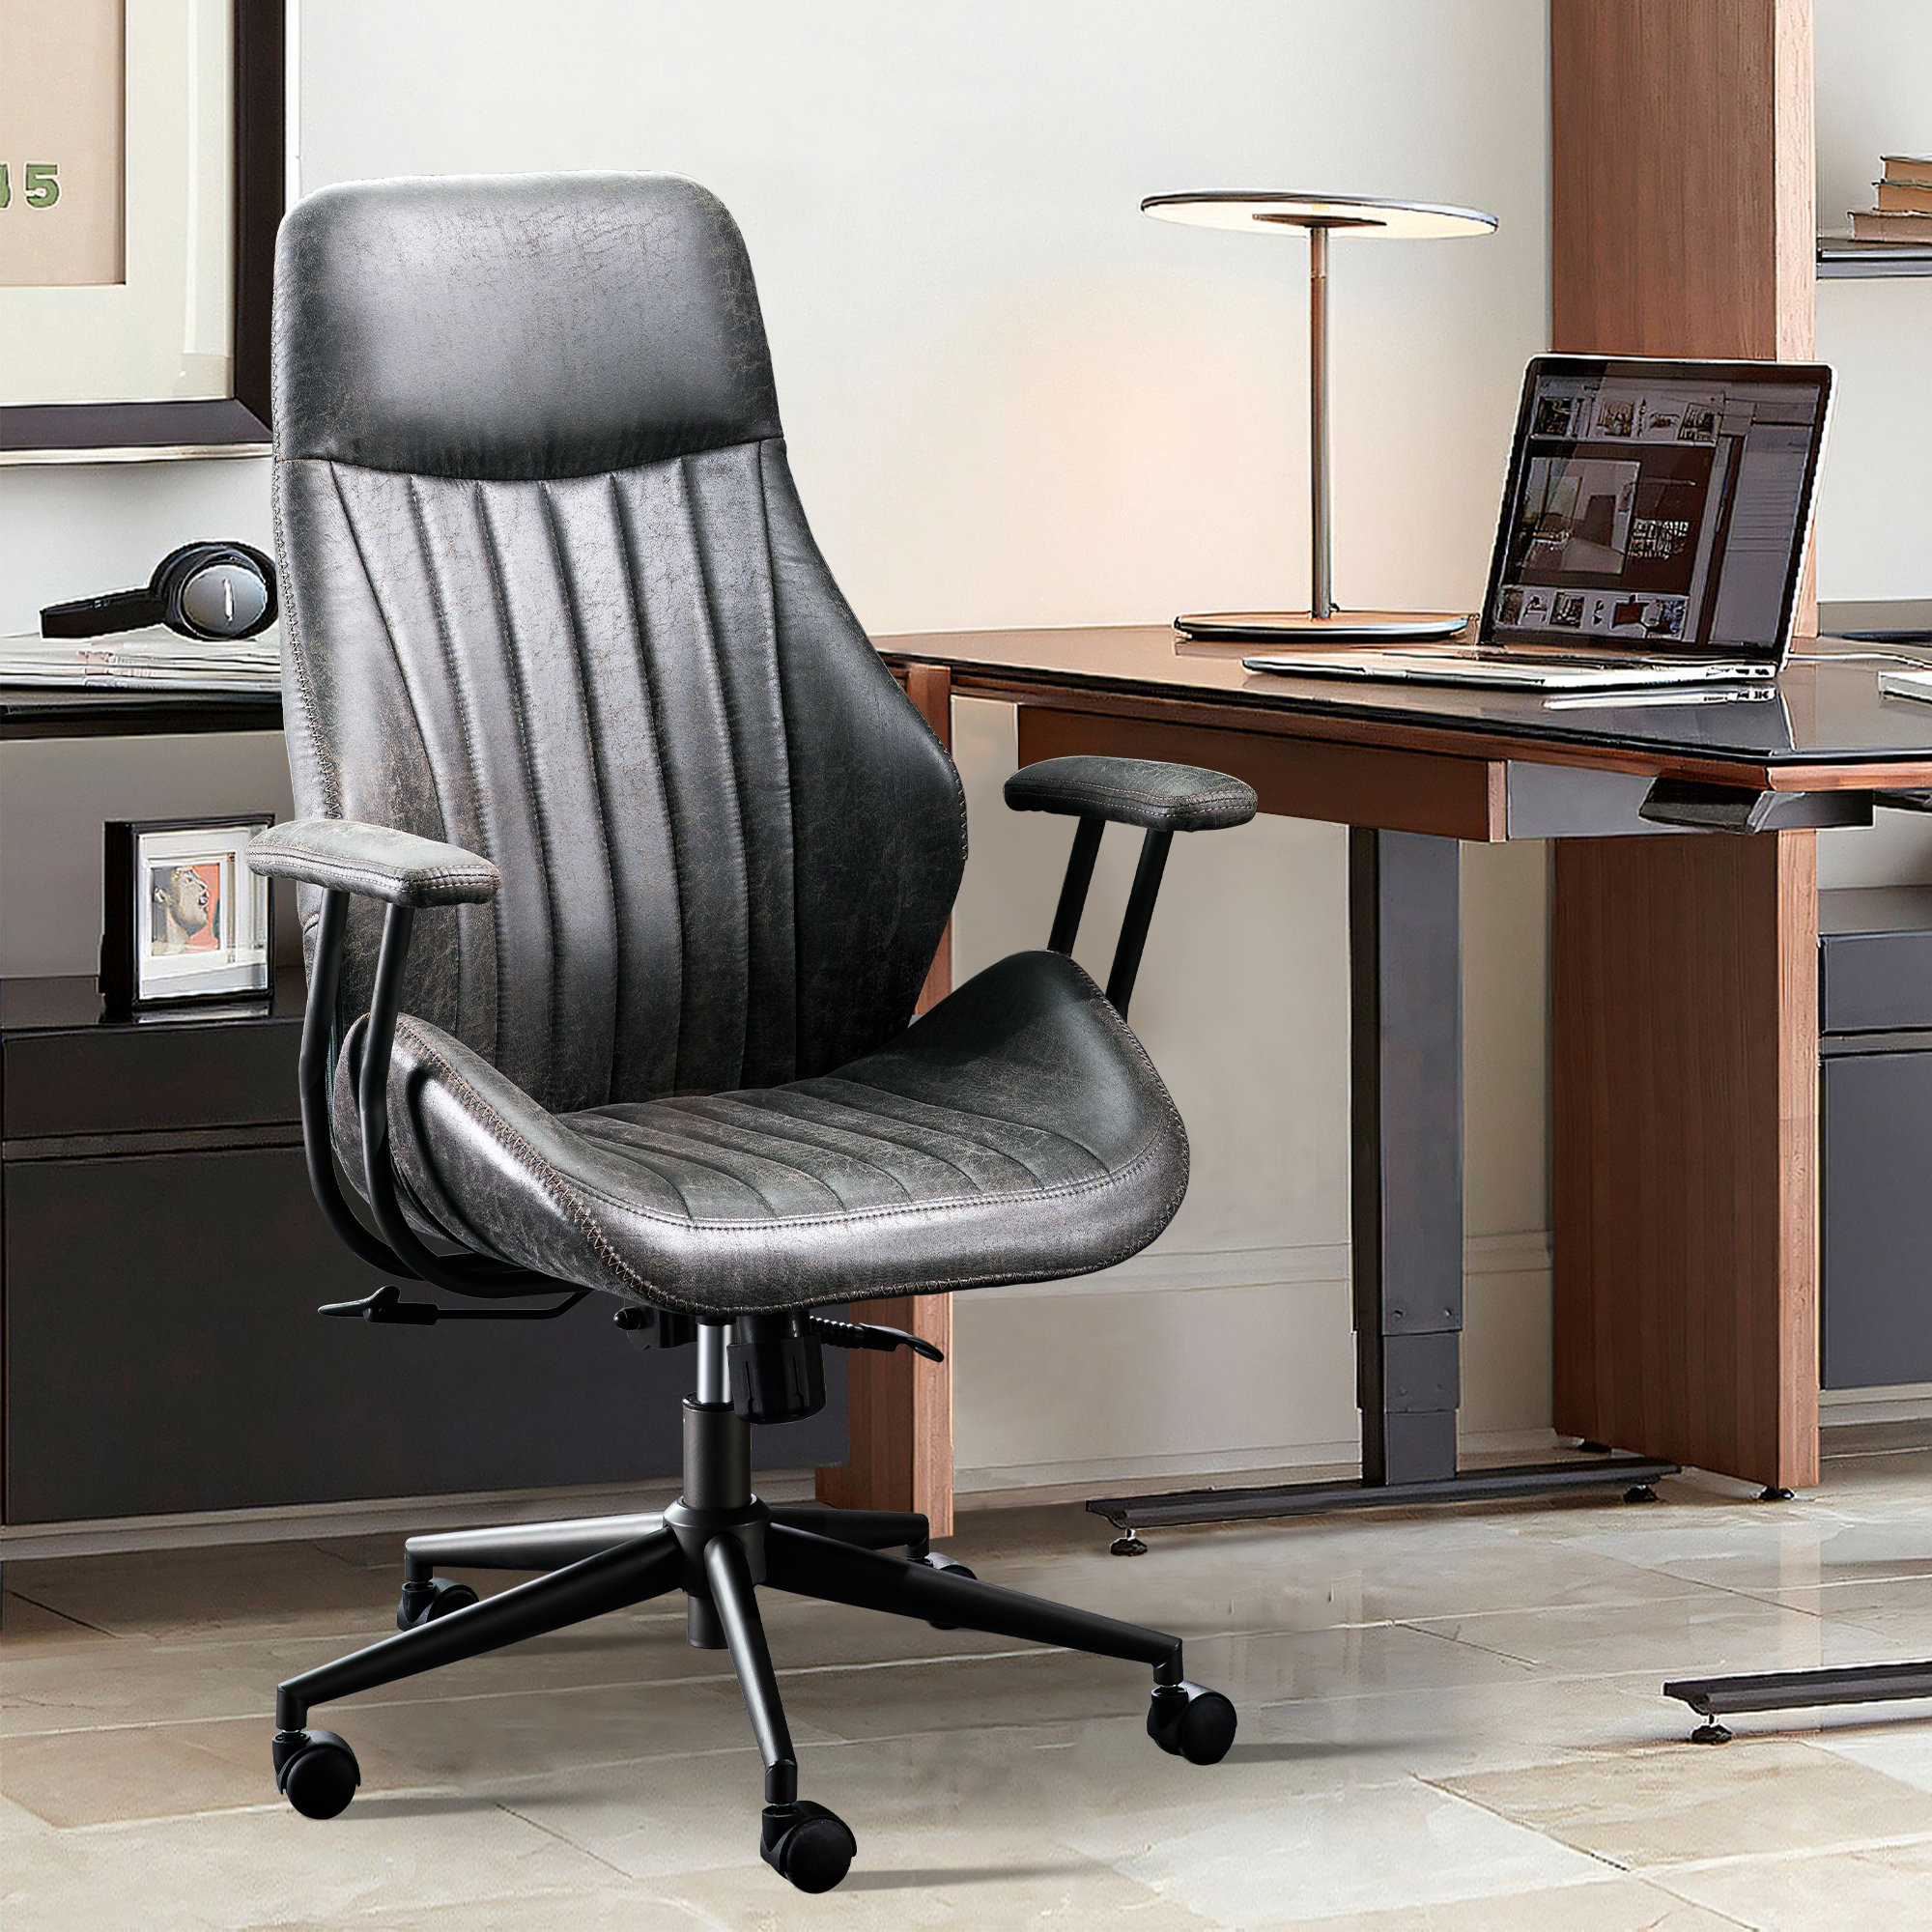 Executive Upholstered Office Chairs You'll Love | Wayfair